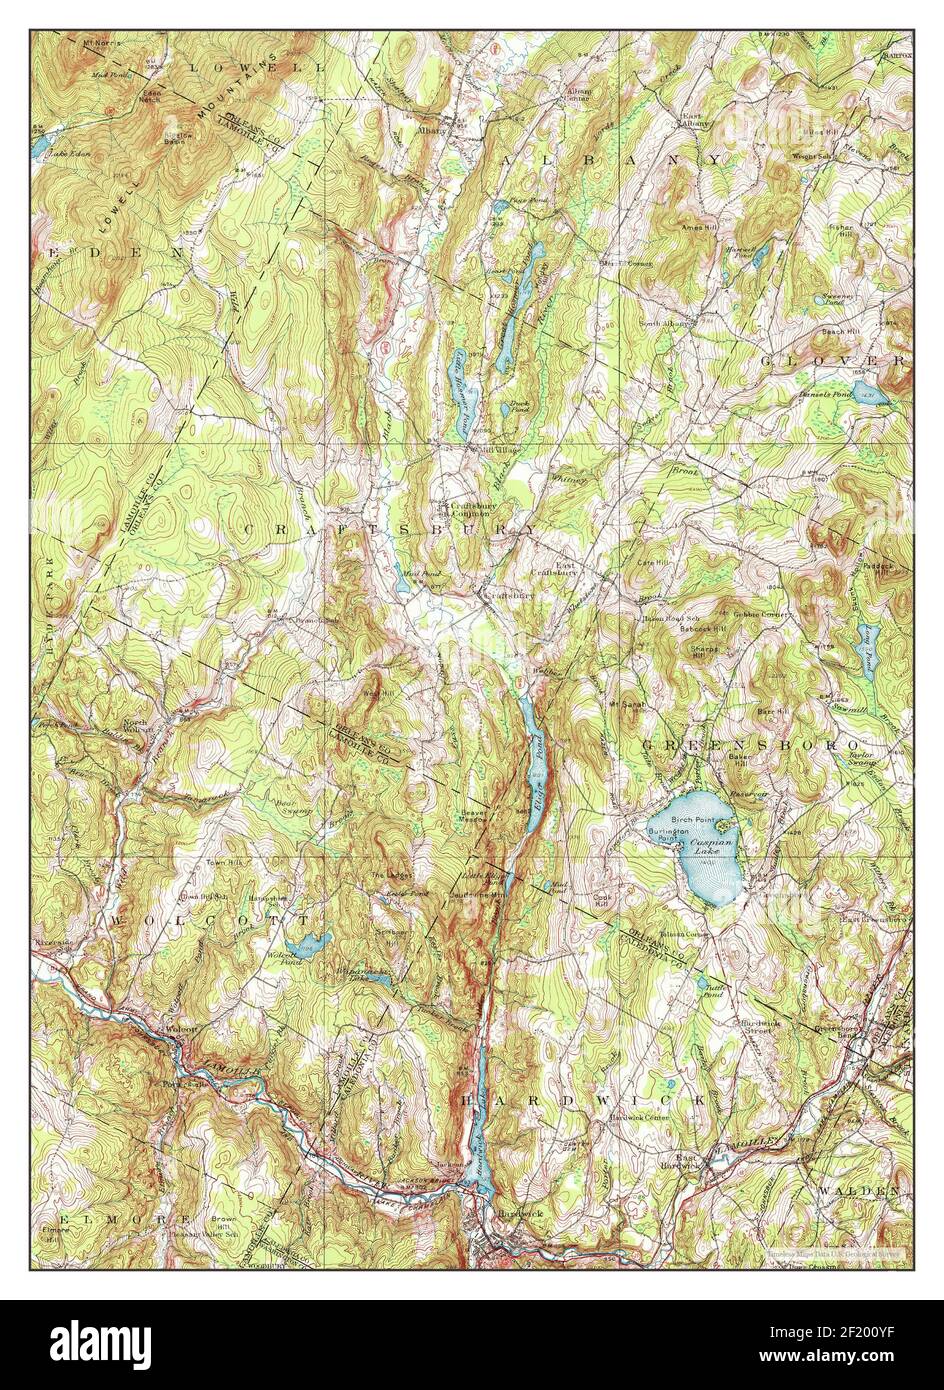 Hardwick, Vermont, map 1951, 1:62500, United States of America by Timeless Maps, data U.S. Geological Survey Stock Photo